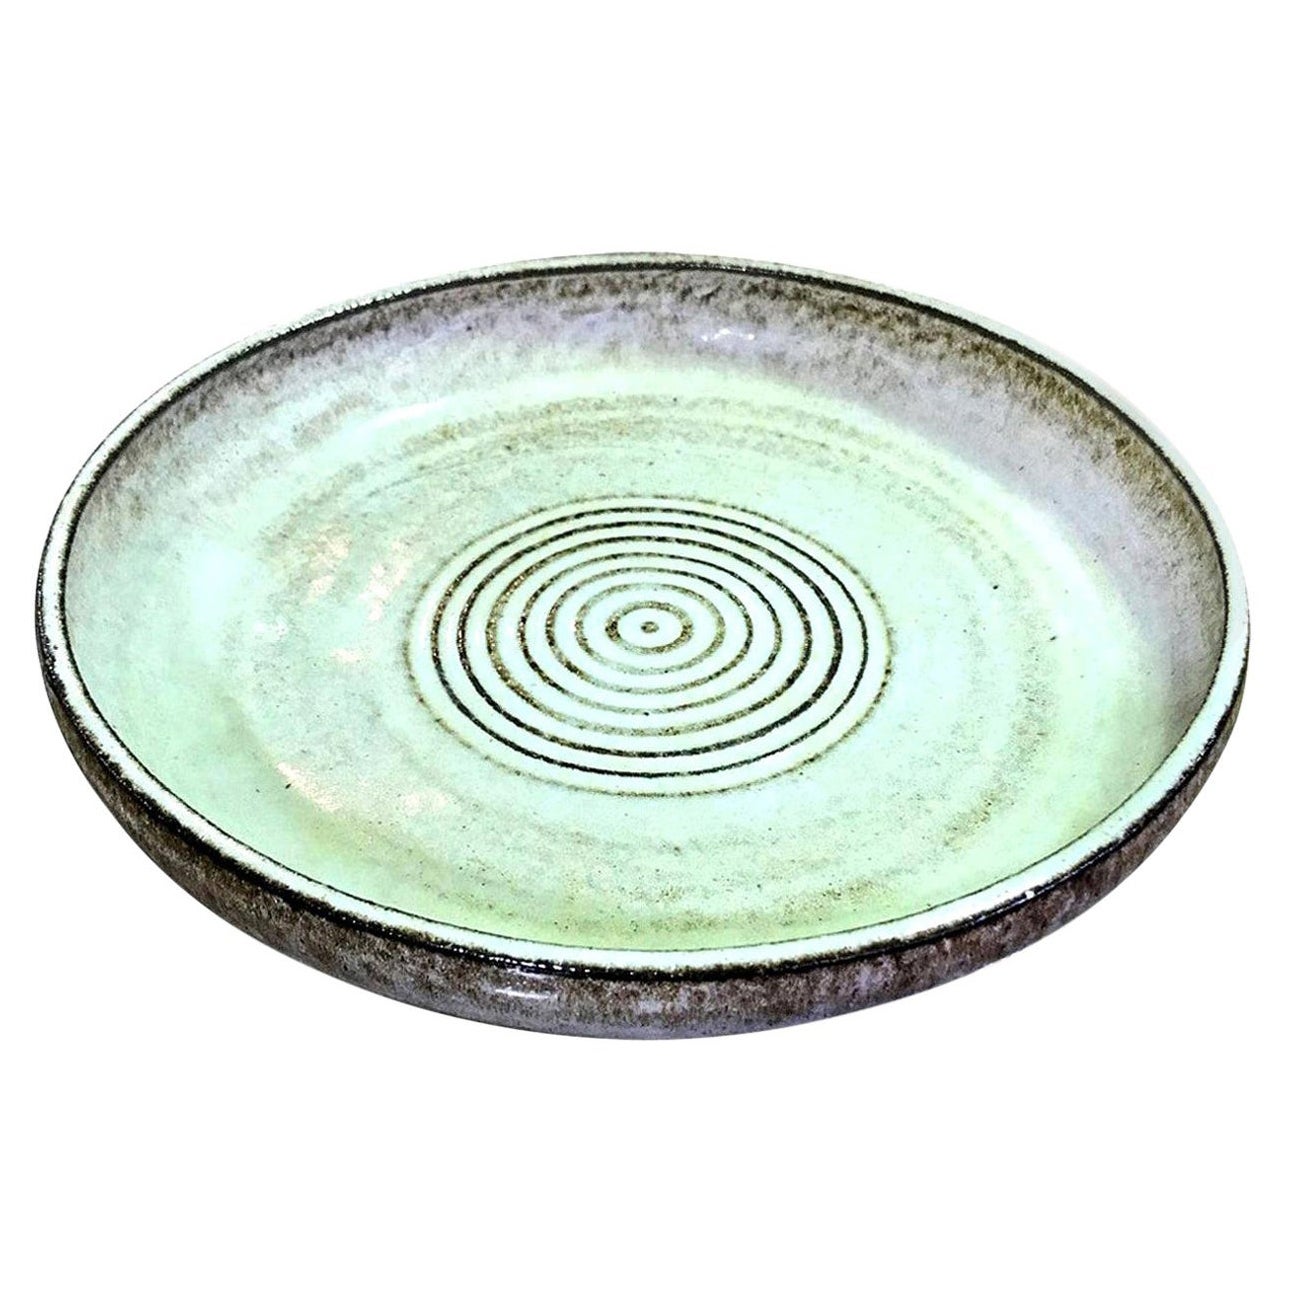 Laura Andreson Signed Large Mid-Century Modern Ceramic Pottery Low Bowl, 1954